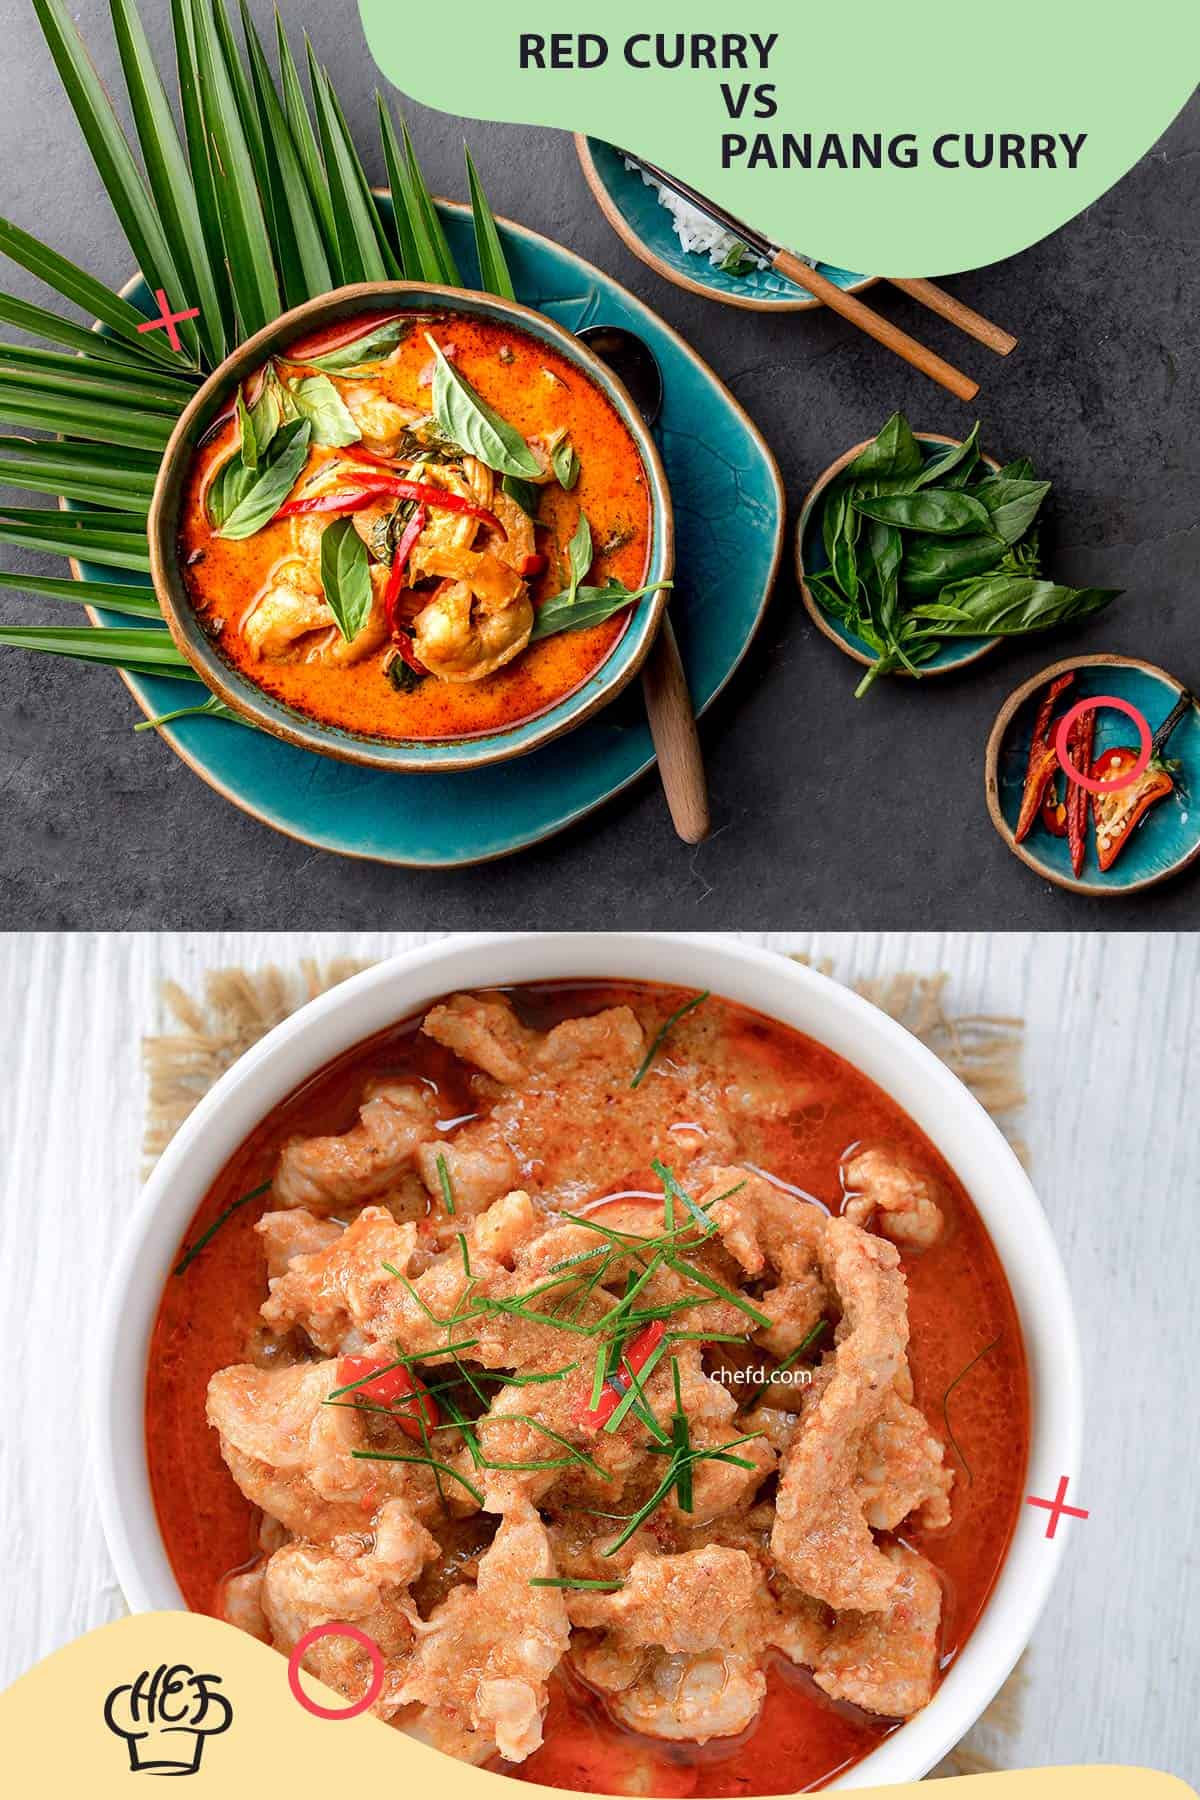 Red Curry vs Panang Curry: Key Differences